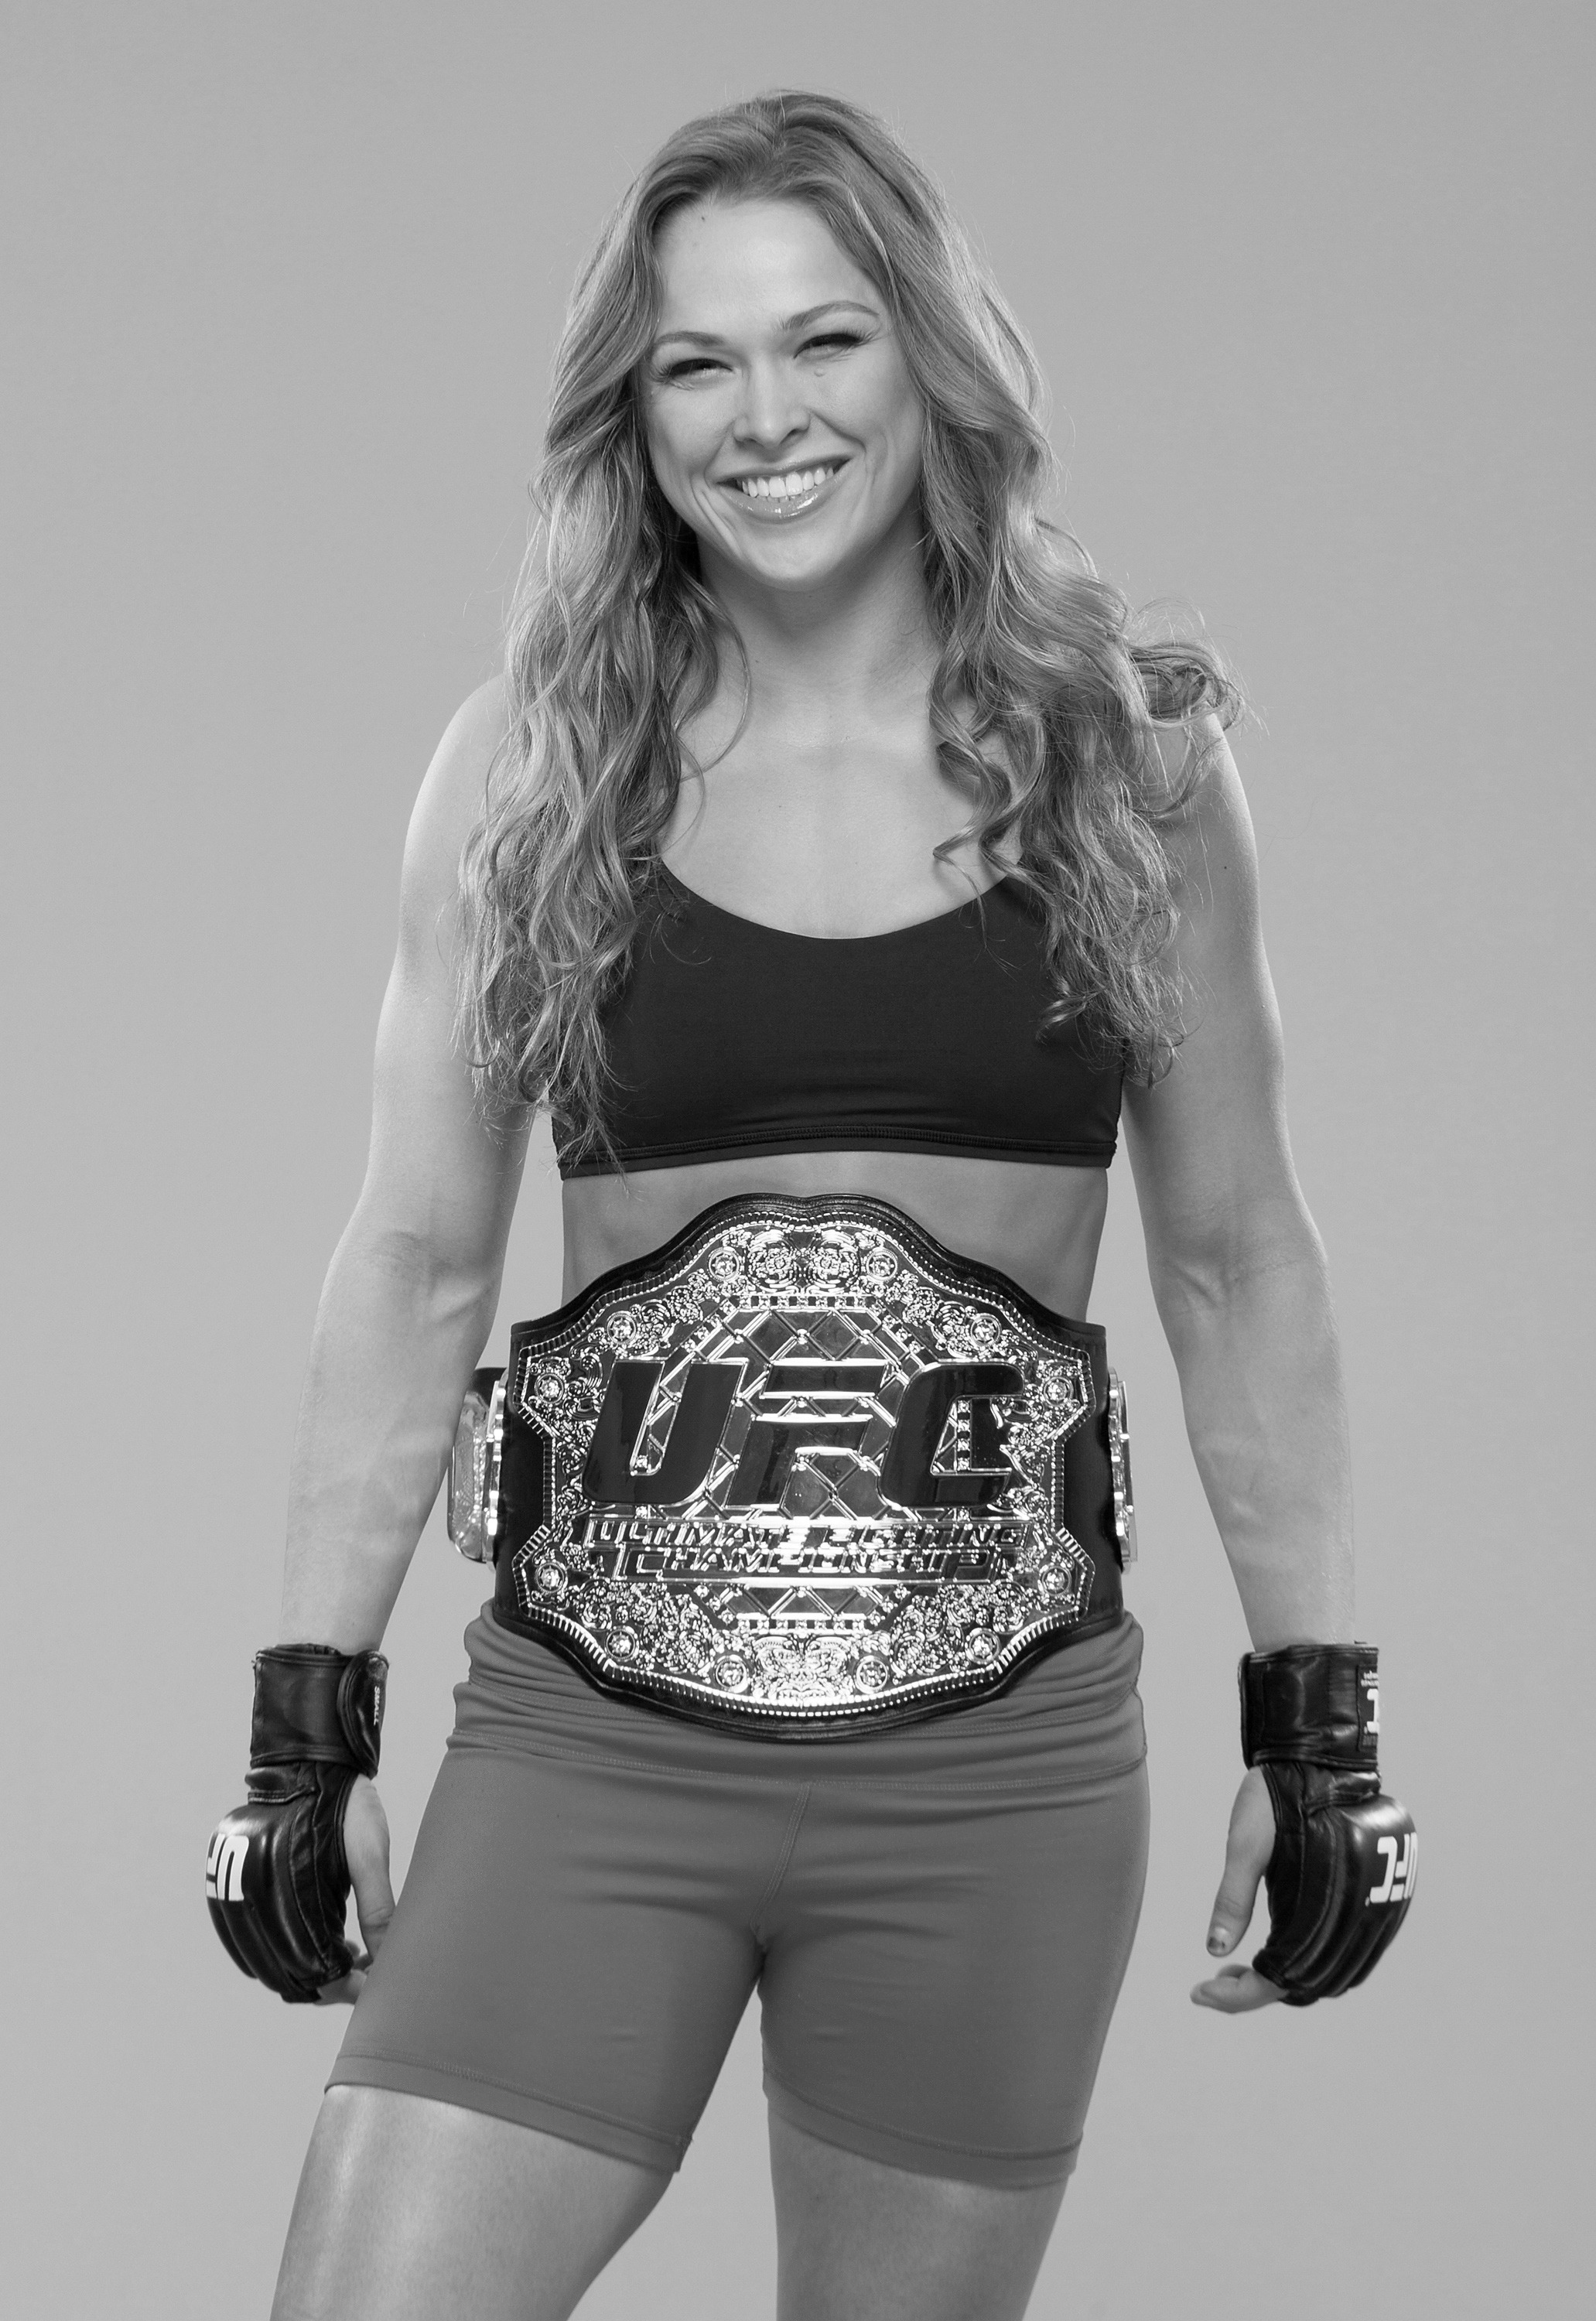 Ronda Rousey poses for a portrait on February 20, 2013 in Anaheim, California. (Jim Kemper—Getty Images)